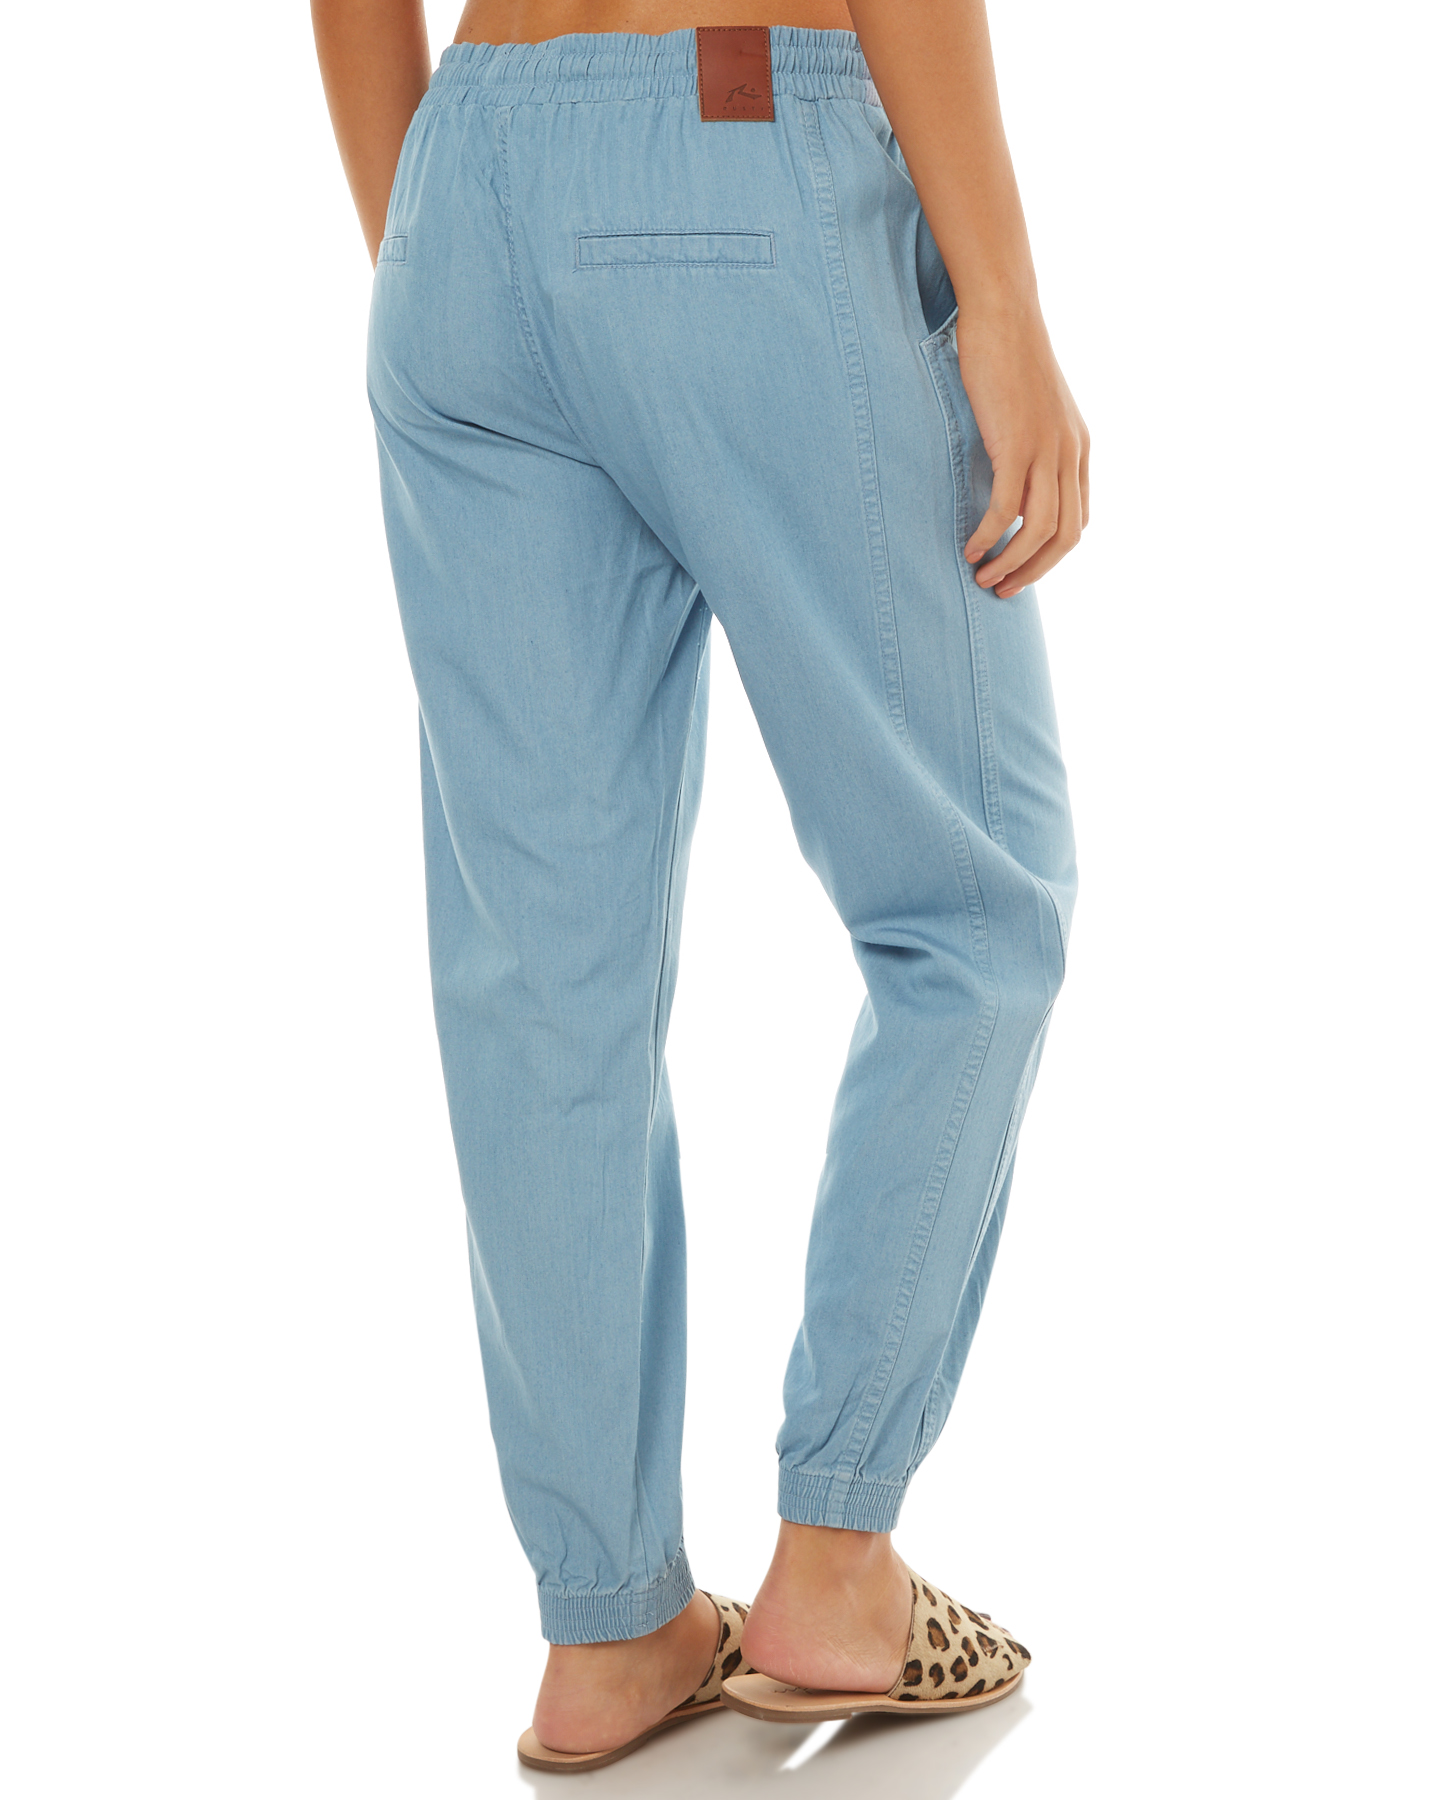 Rusty Womens Leap Pant - Sky Blue | SurfStitch